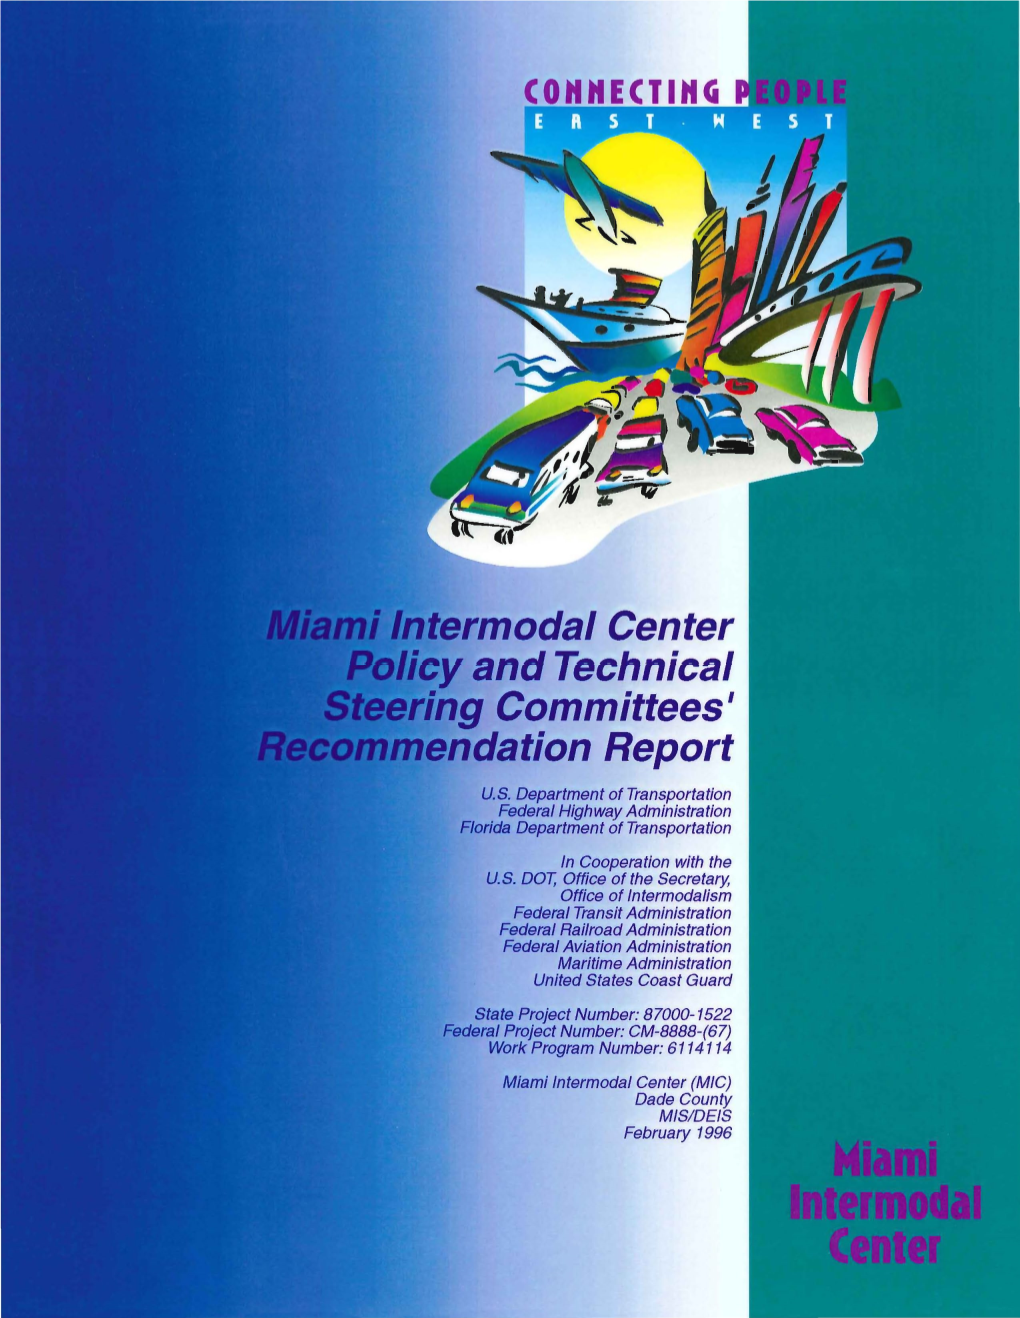 Miami Intermodal Center Policy and Technical Steering Committees